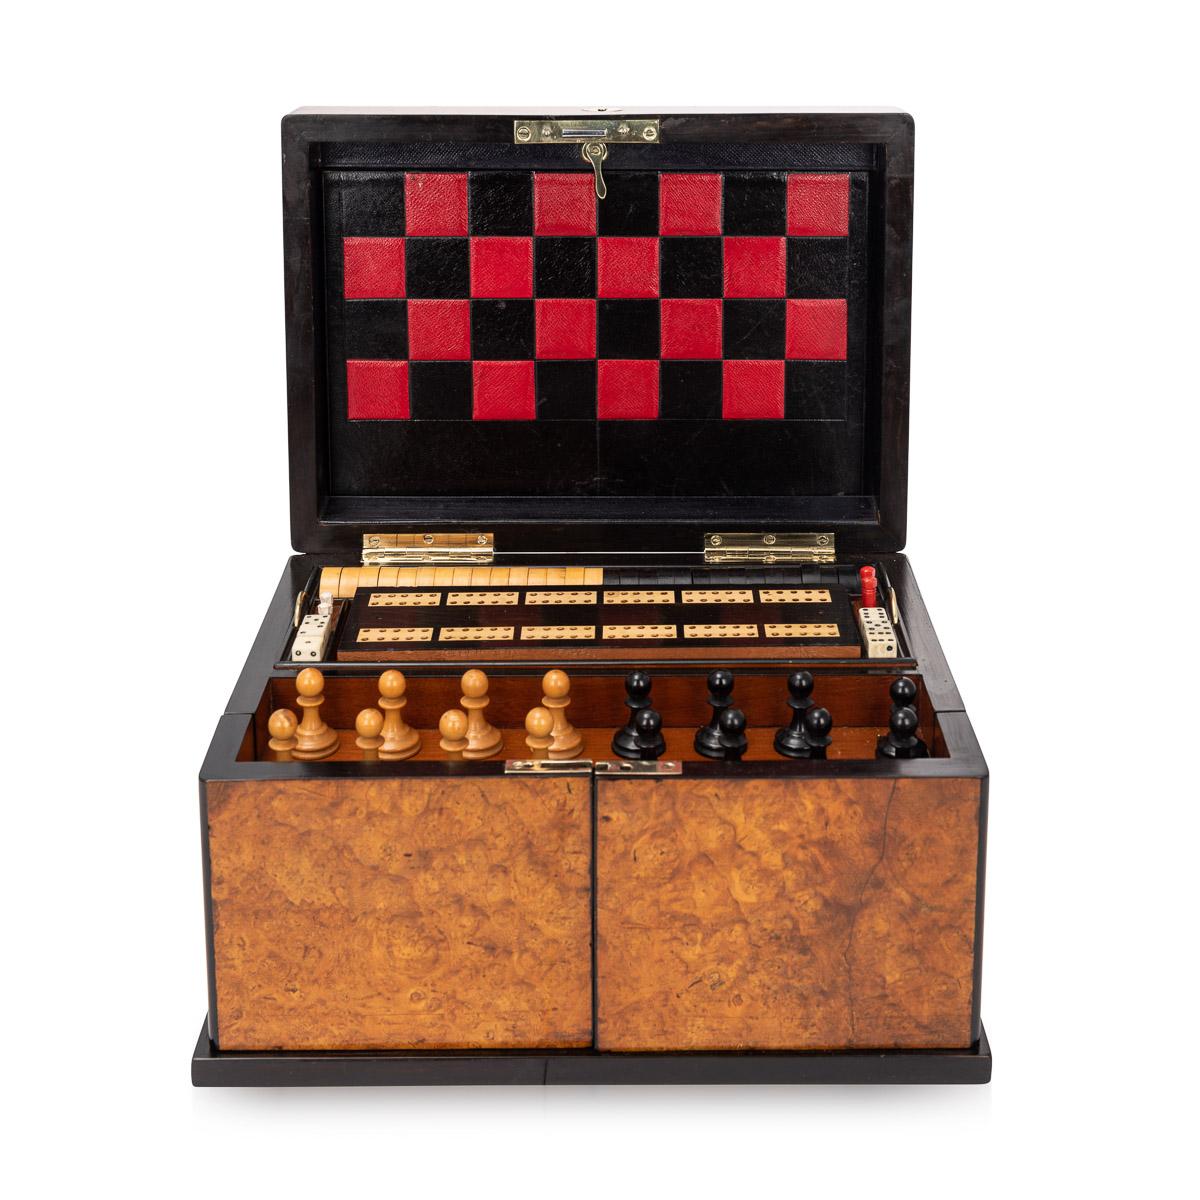 Antique late-19th century Victorian burr walnut cased games compendium, the interior comprising a boxwood and ebony chess set, draughts, dominoes, dice, cribbage board with markers, leather bound boards for games, playing cards, droughts counters, a